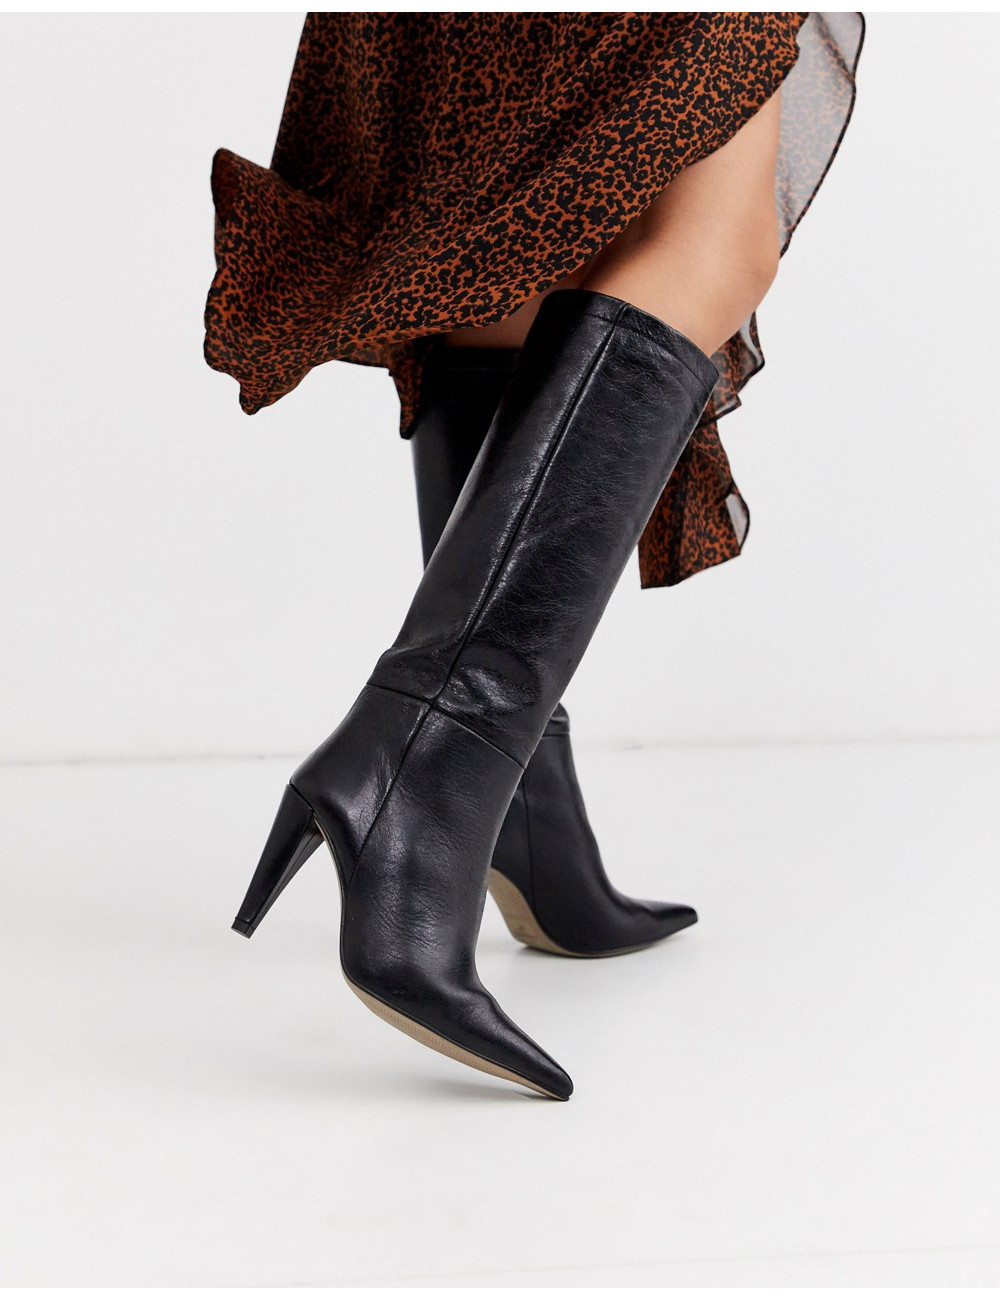 Topshop over the knee boots...